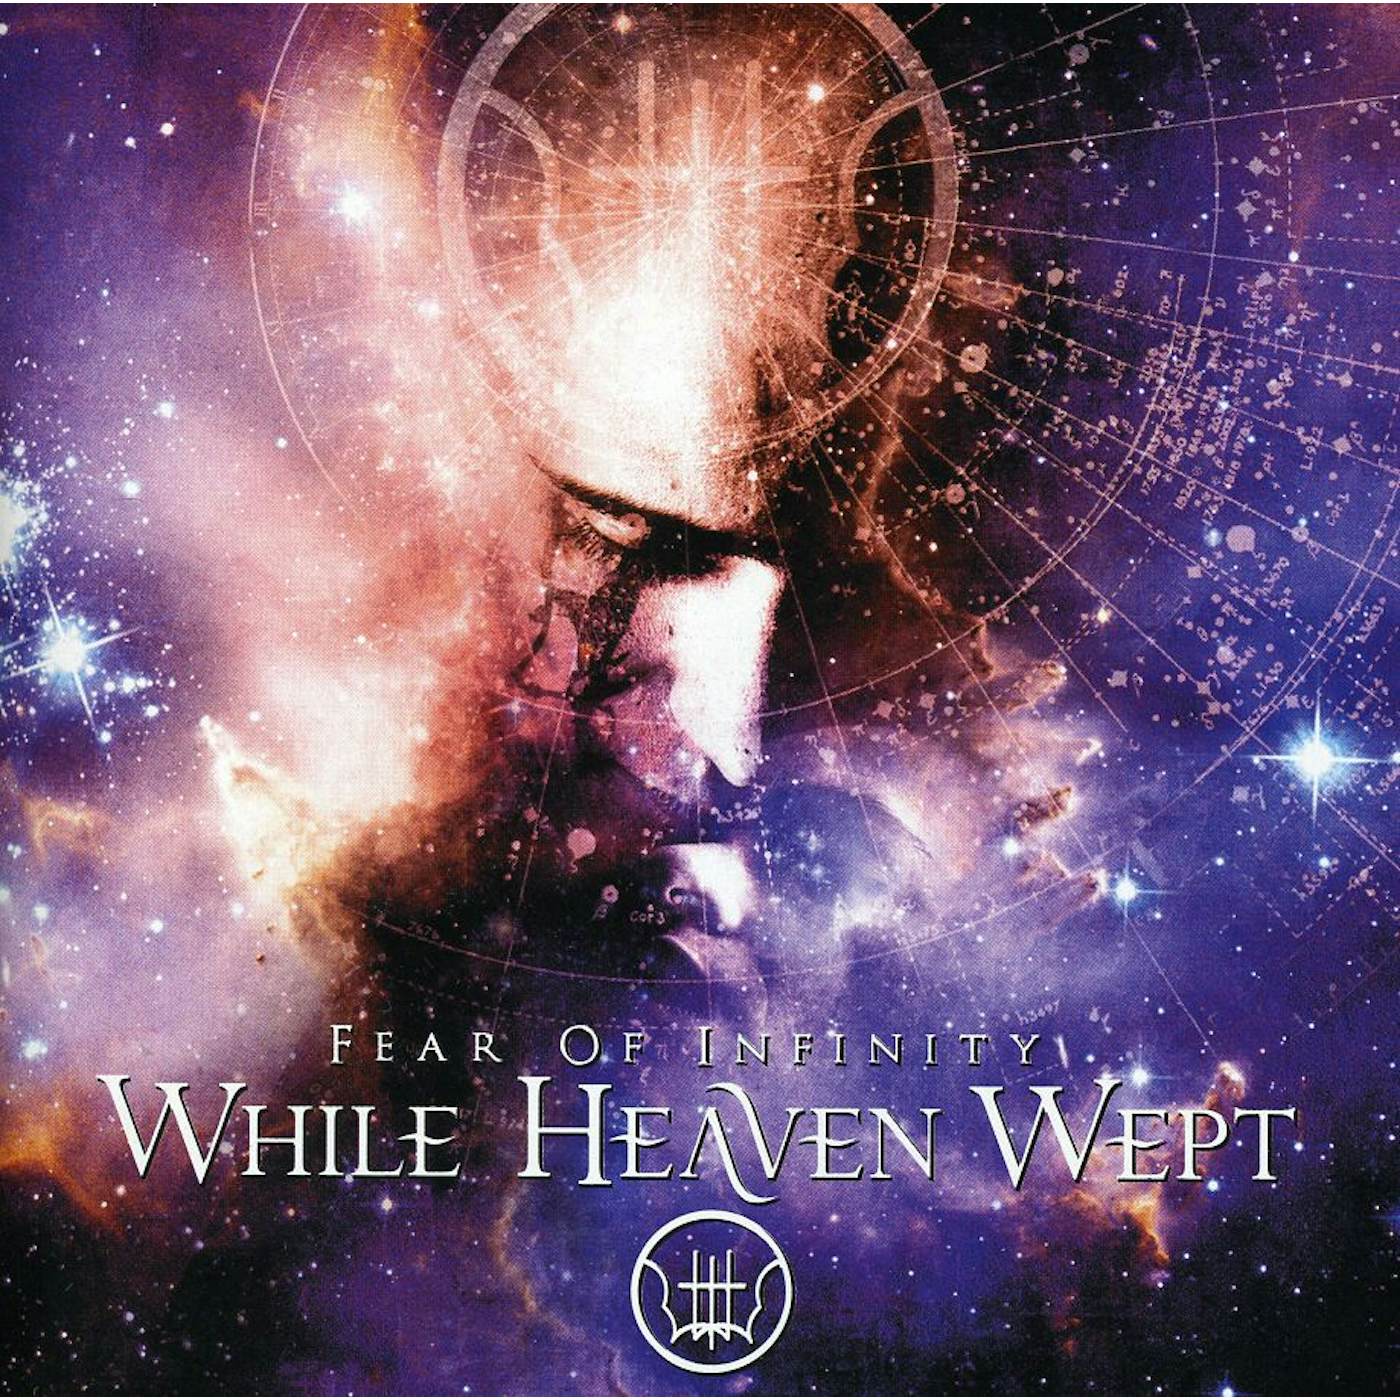 While Heaven Wept FEAR OF INFINITY CD